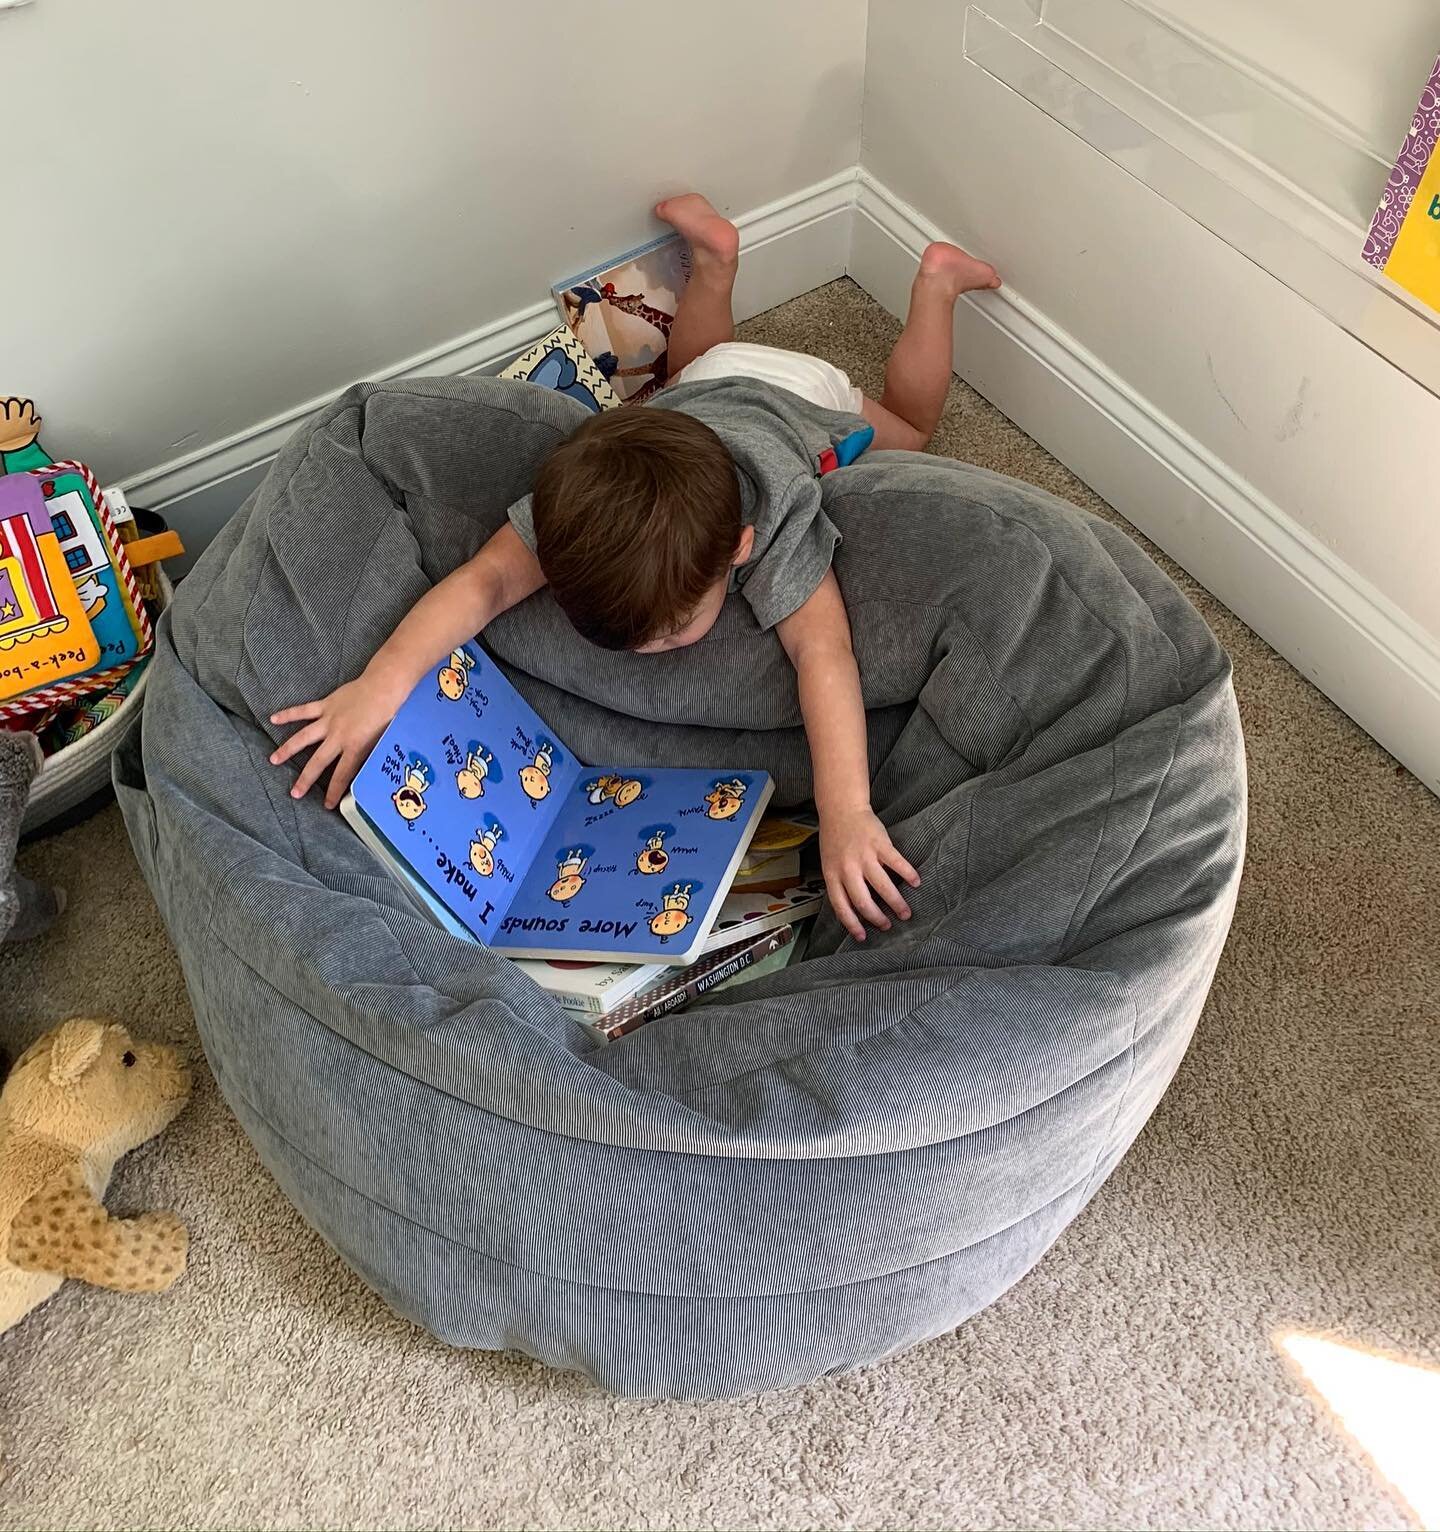 You are never too young to learn to read or too old to start because reading is dreaming with your eyes open 💙 this kid is the cutest little reader! #littlereadersnook